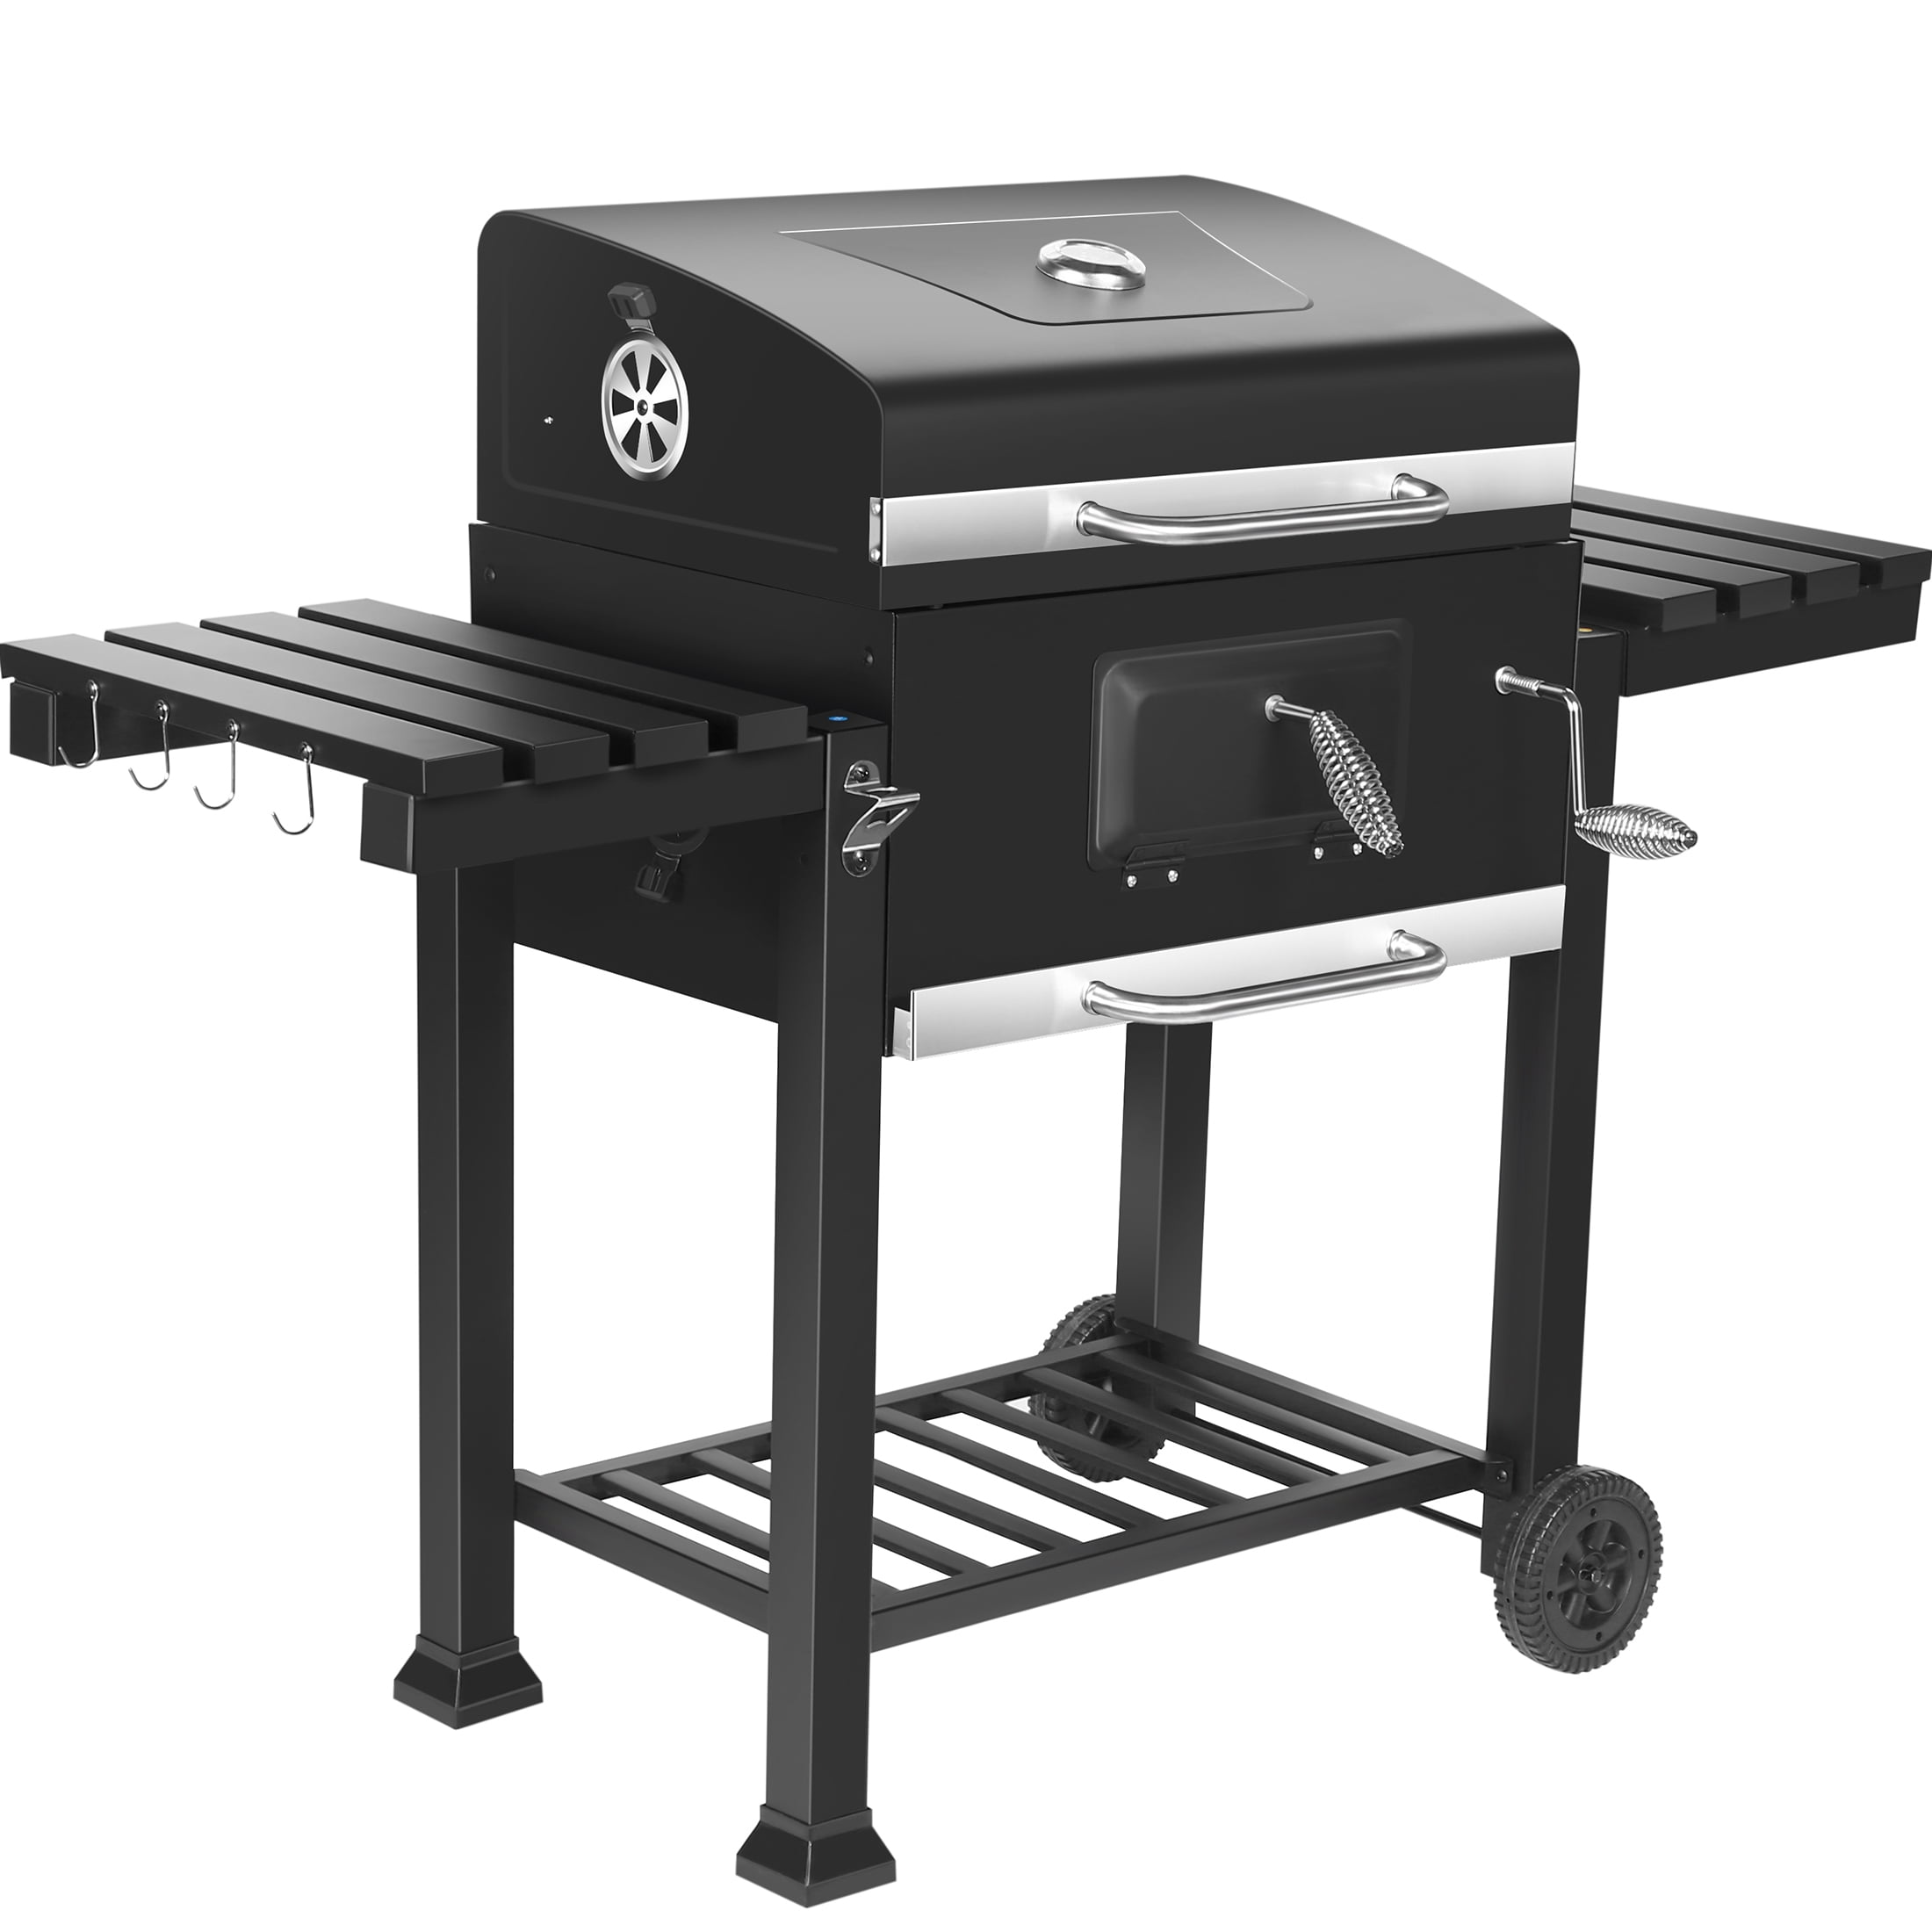 SUGIFT 24-inch BBQ Grill with 2 Shelves, Black - Walmart.com